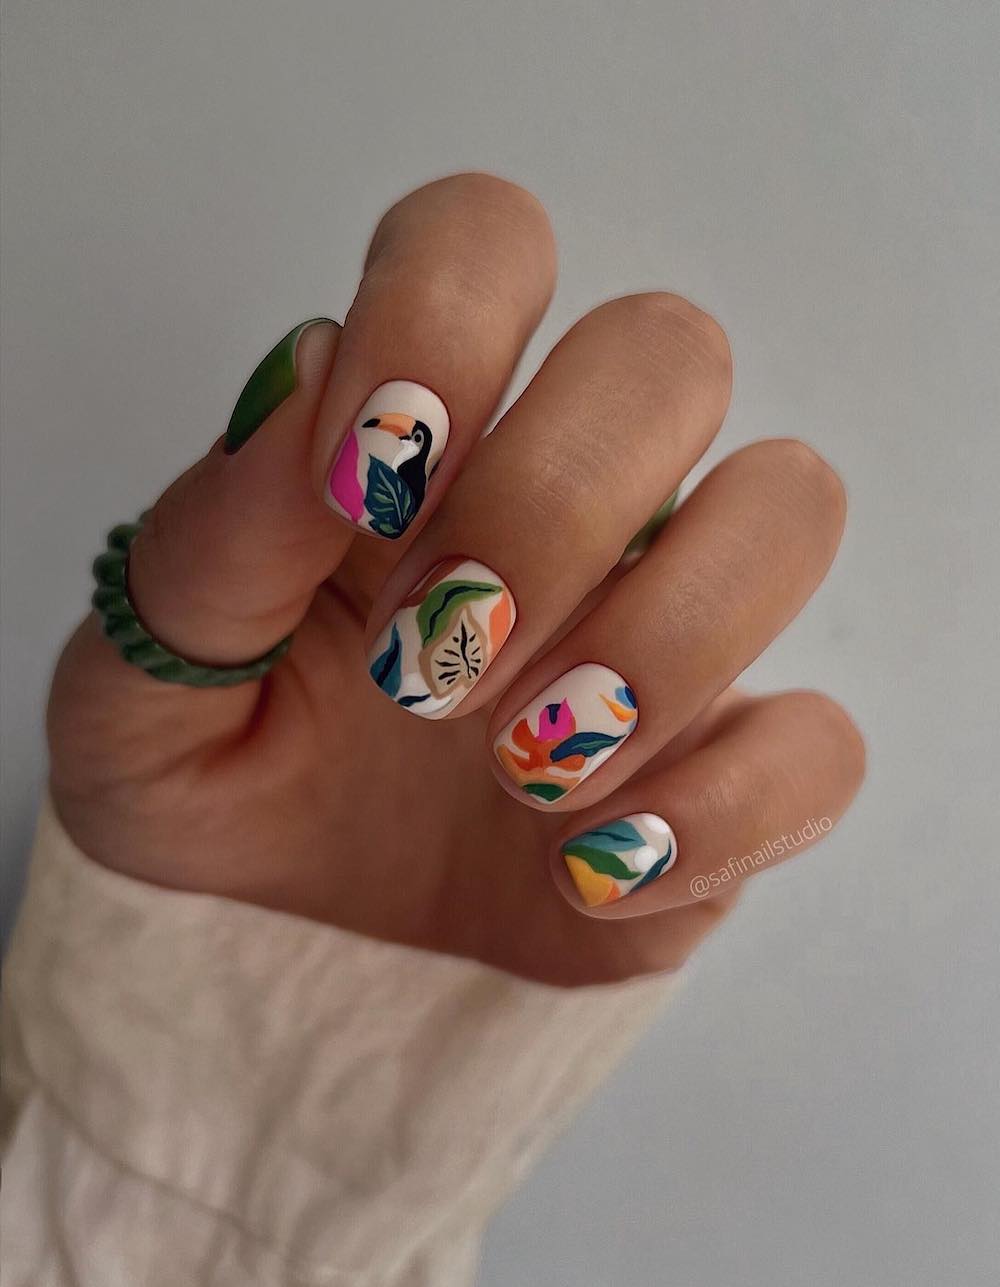 A hand with short square nails with a matte nude base and tropical vacation nail art featuring flowers, plants, and a toucan